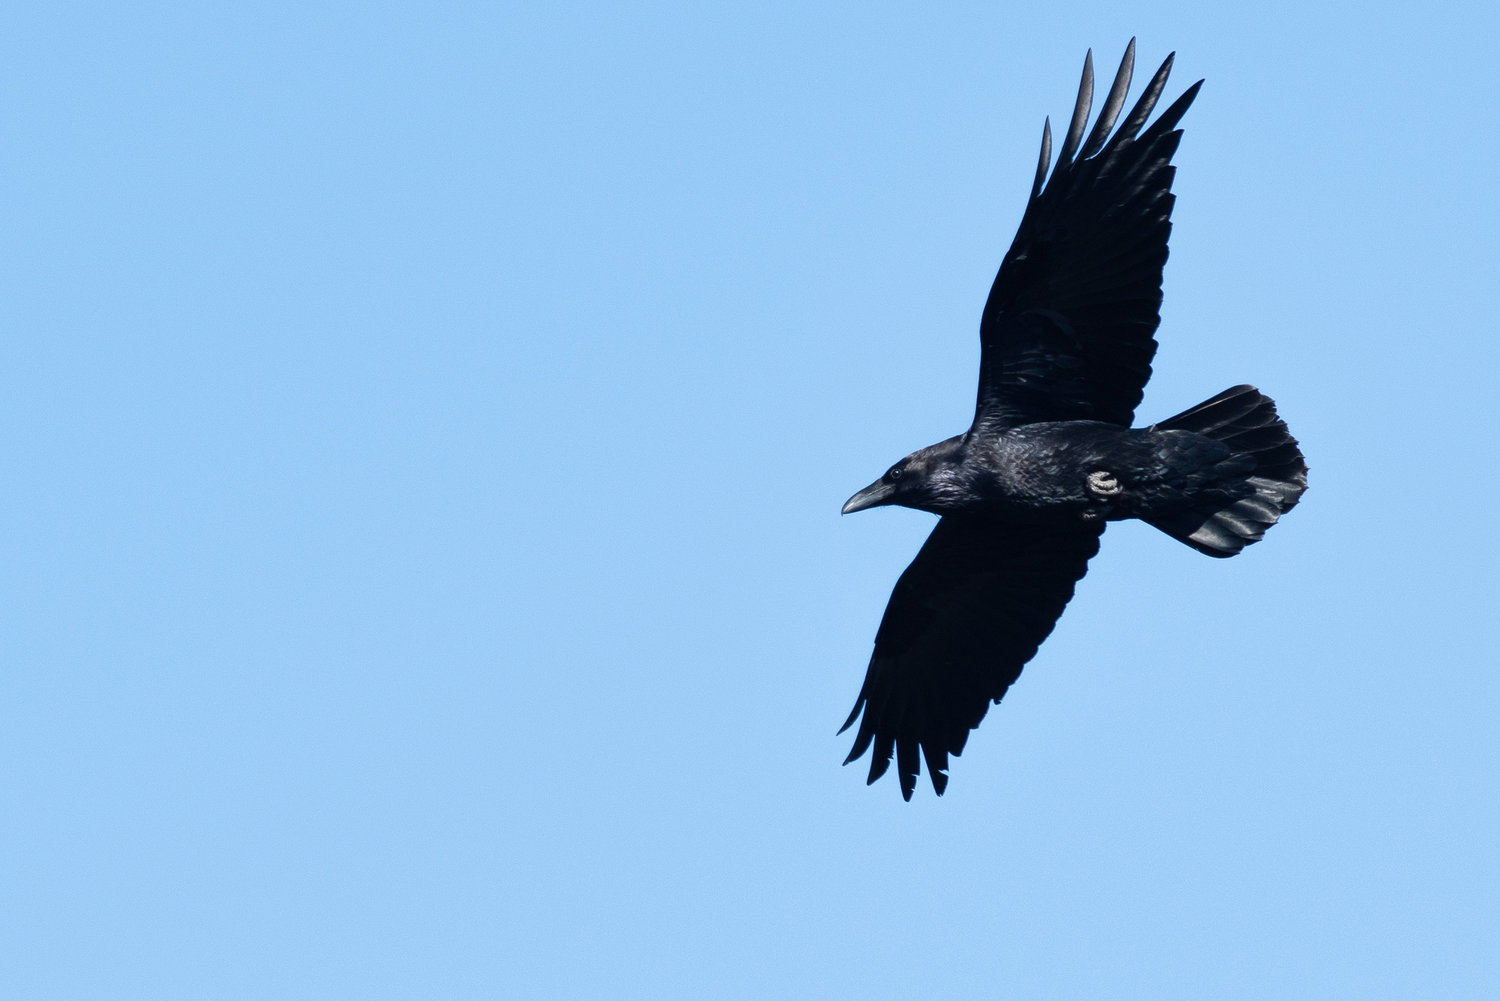 Common Black Raven. Note the diamond-shaped tail, which distinguishes it from the American Crow.